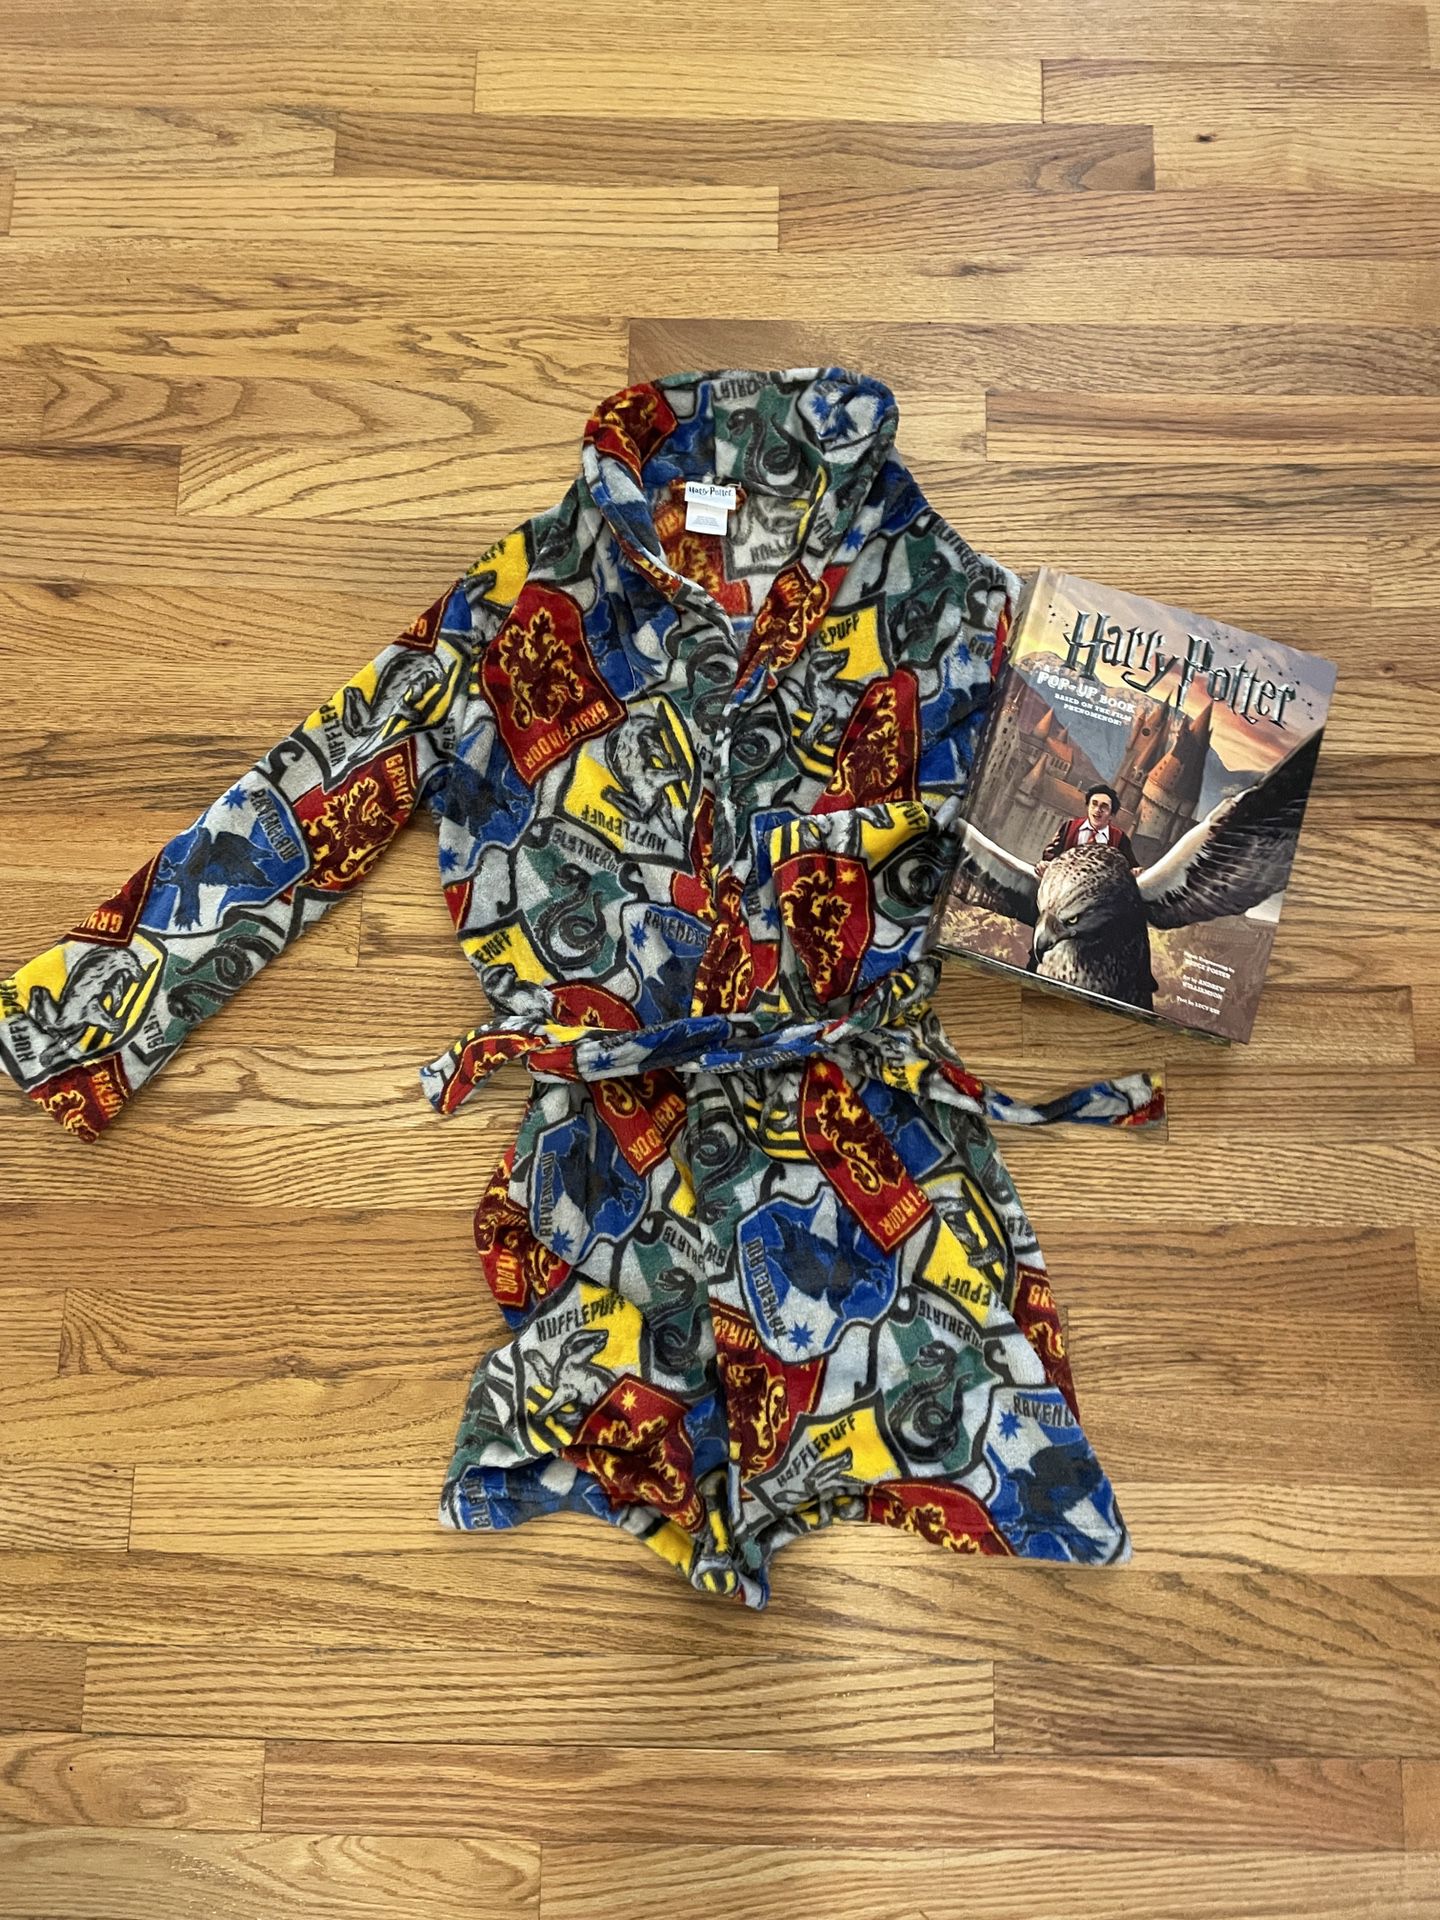 Harry Potter Robe and Pop Up Book